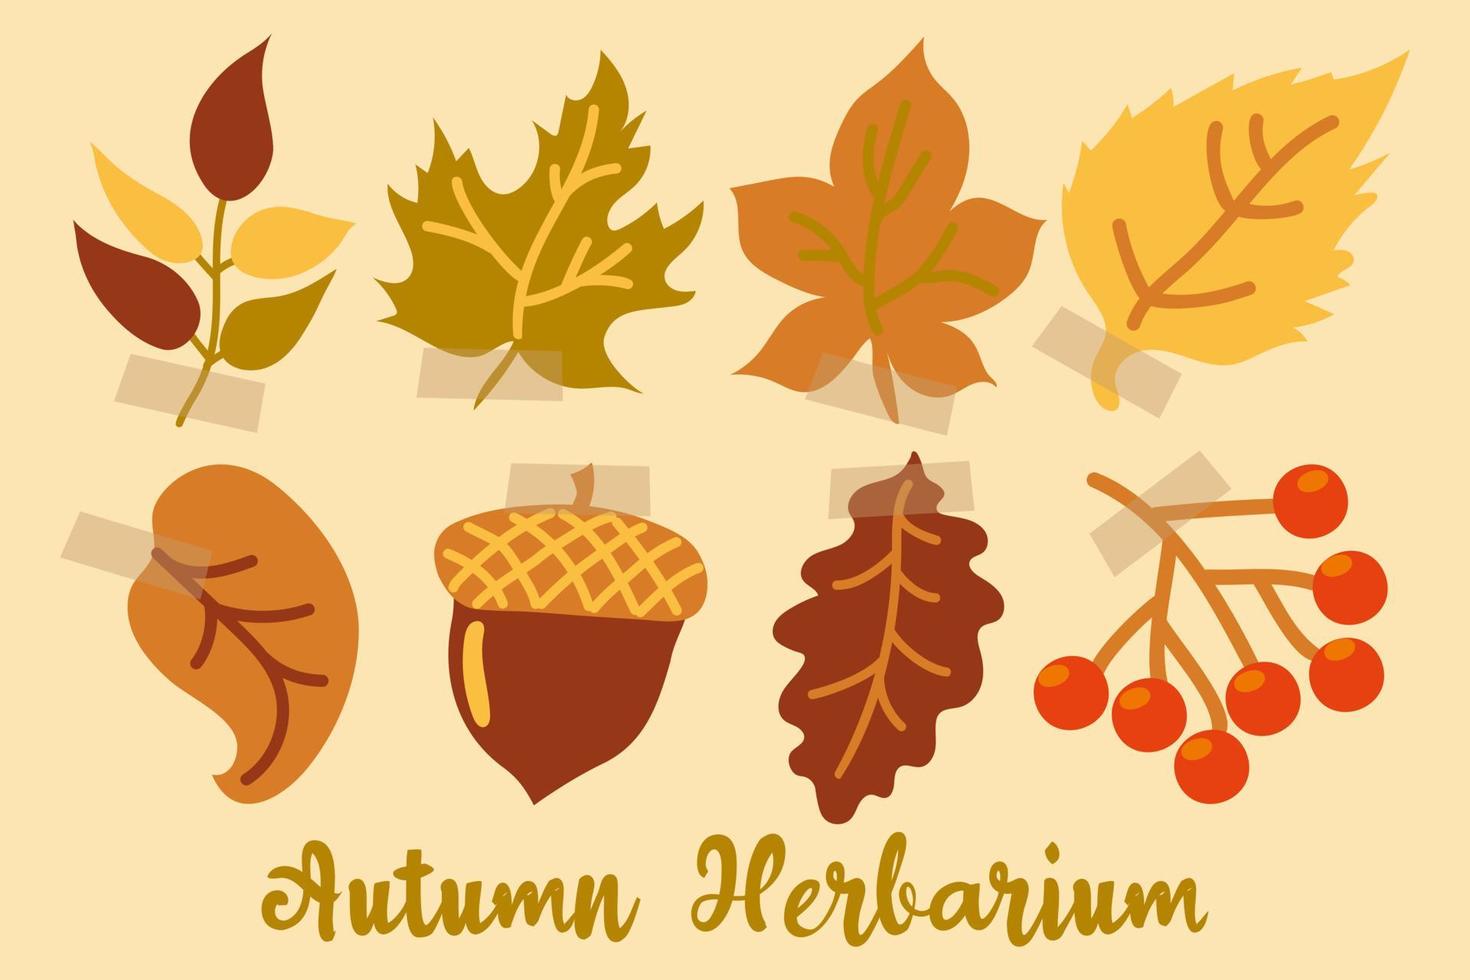 Decorative autumn herbarium with leaves, a branch of berries and an acorn. Autumn leaves. Leaves of oak, maple, ash, birch, rowan and linden branches. Yellow, orange and green. Autumn background. vector